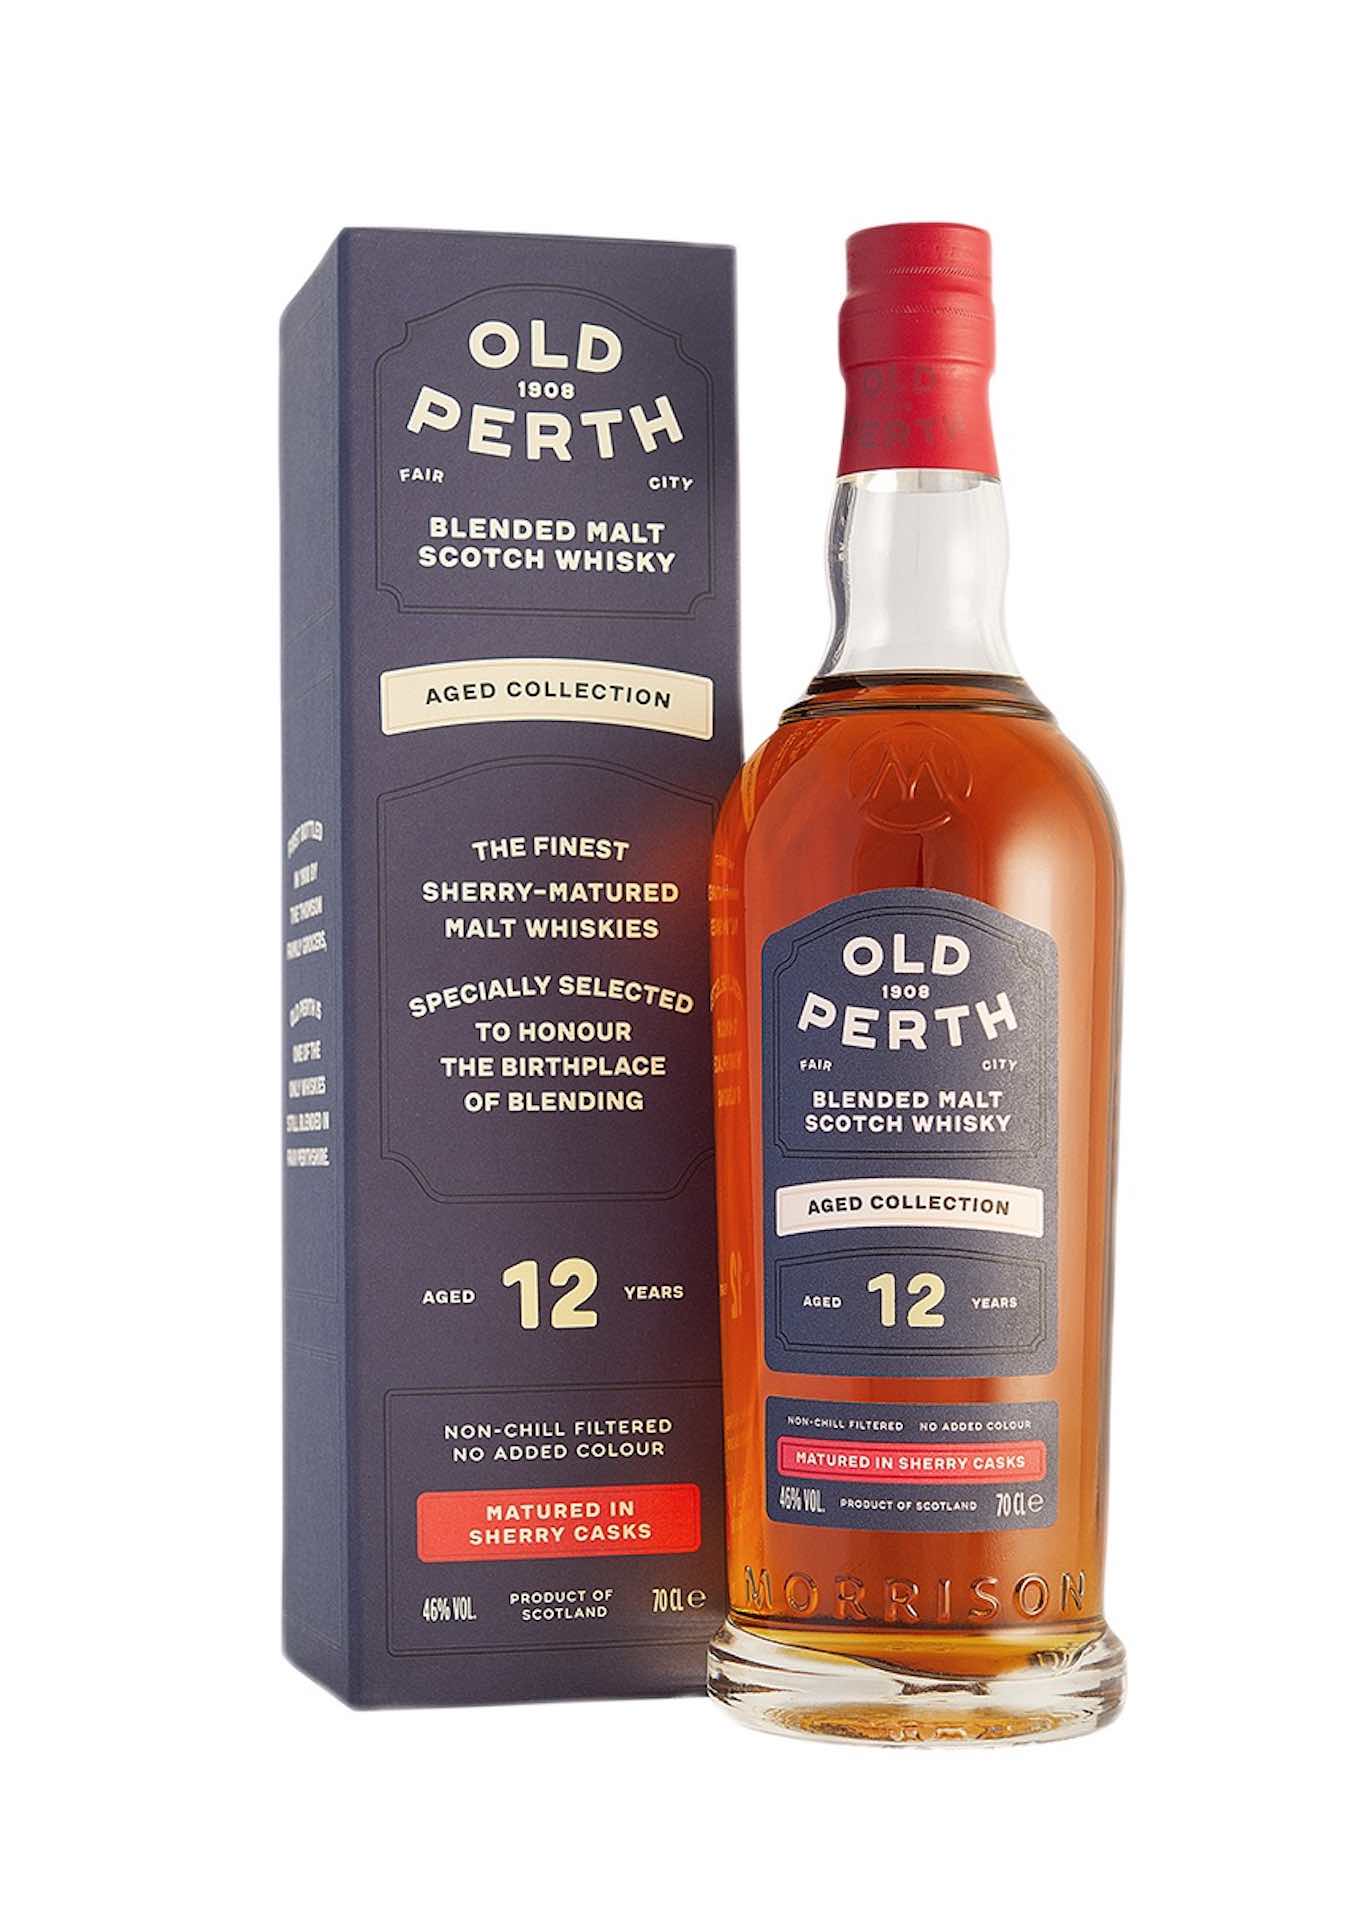 Old Perth 12 Year Old Sherry Cask Whisky